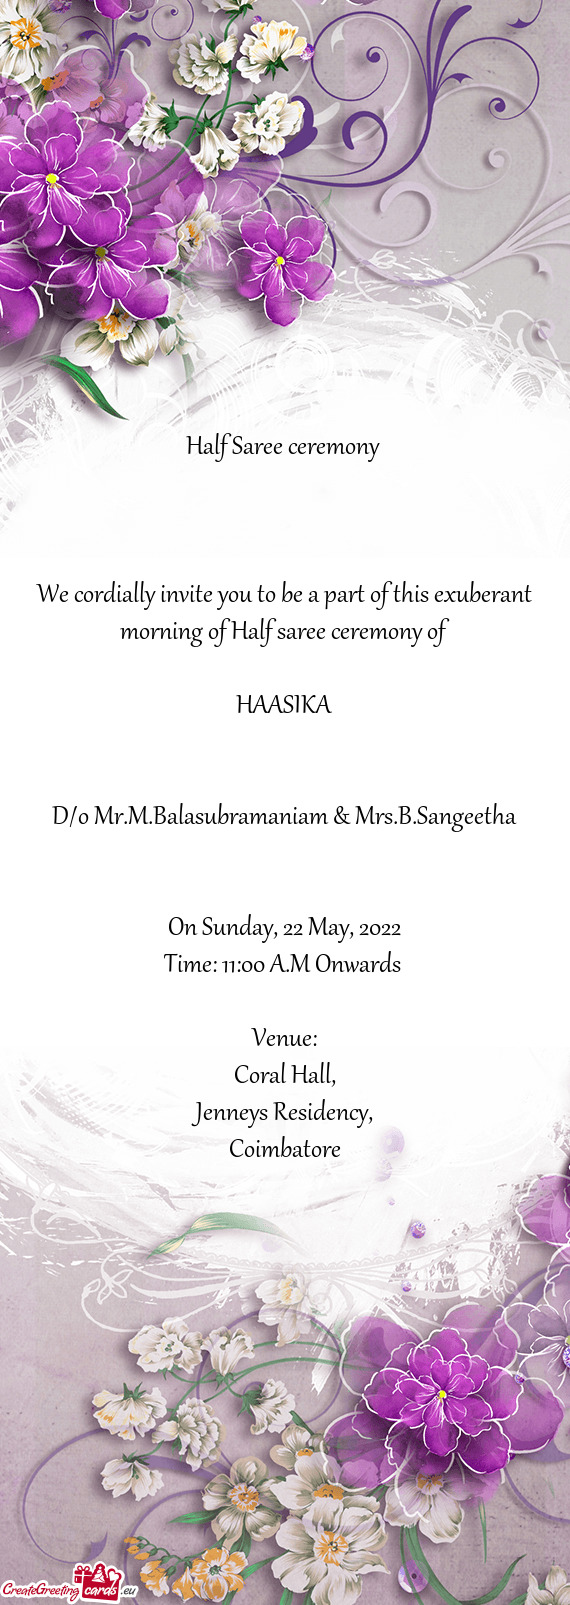 We cordially invite you to be a part of this exuberant morning of Half saree ceremony of